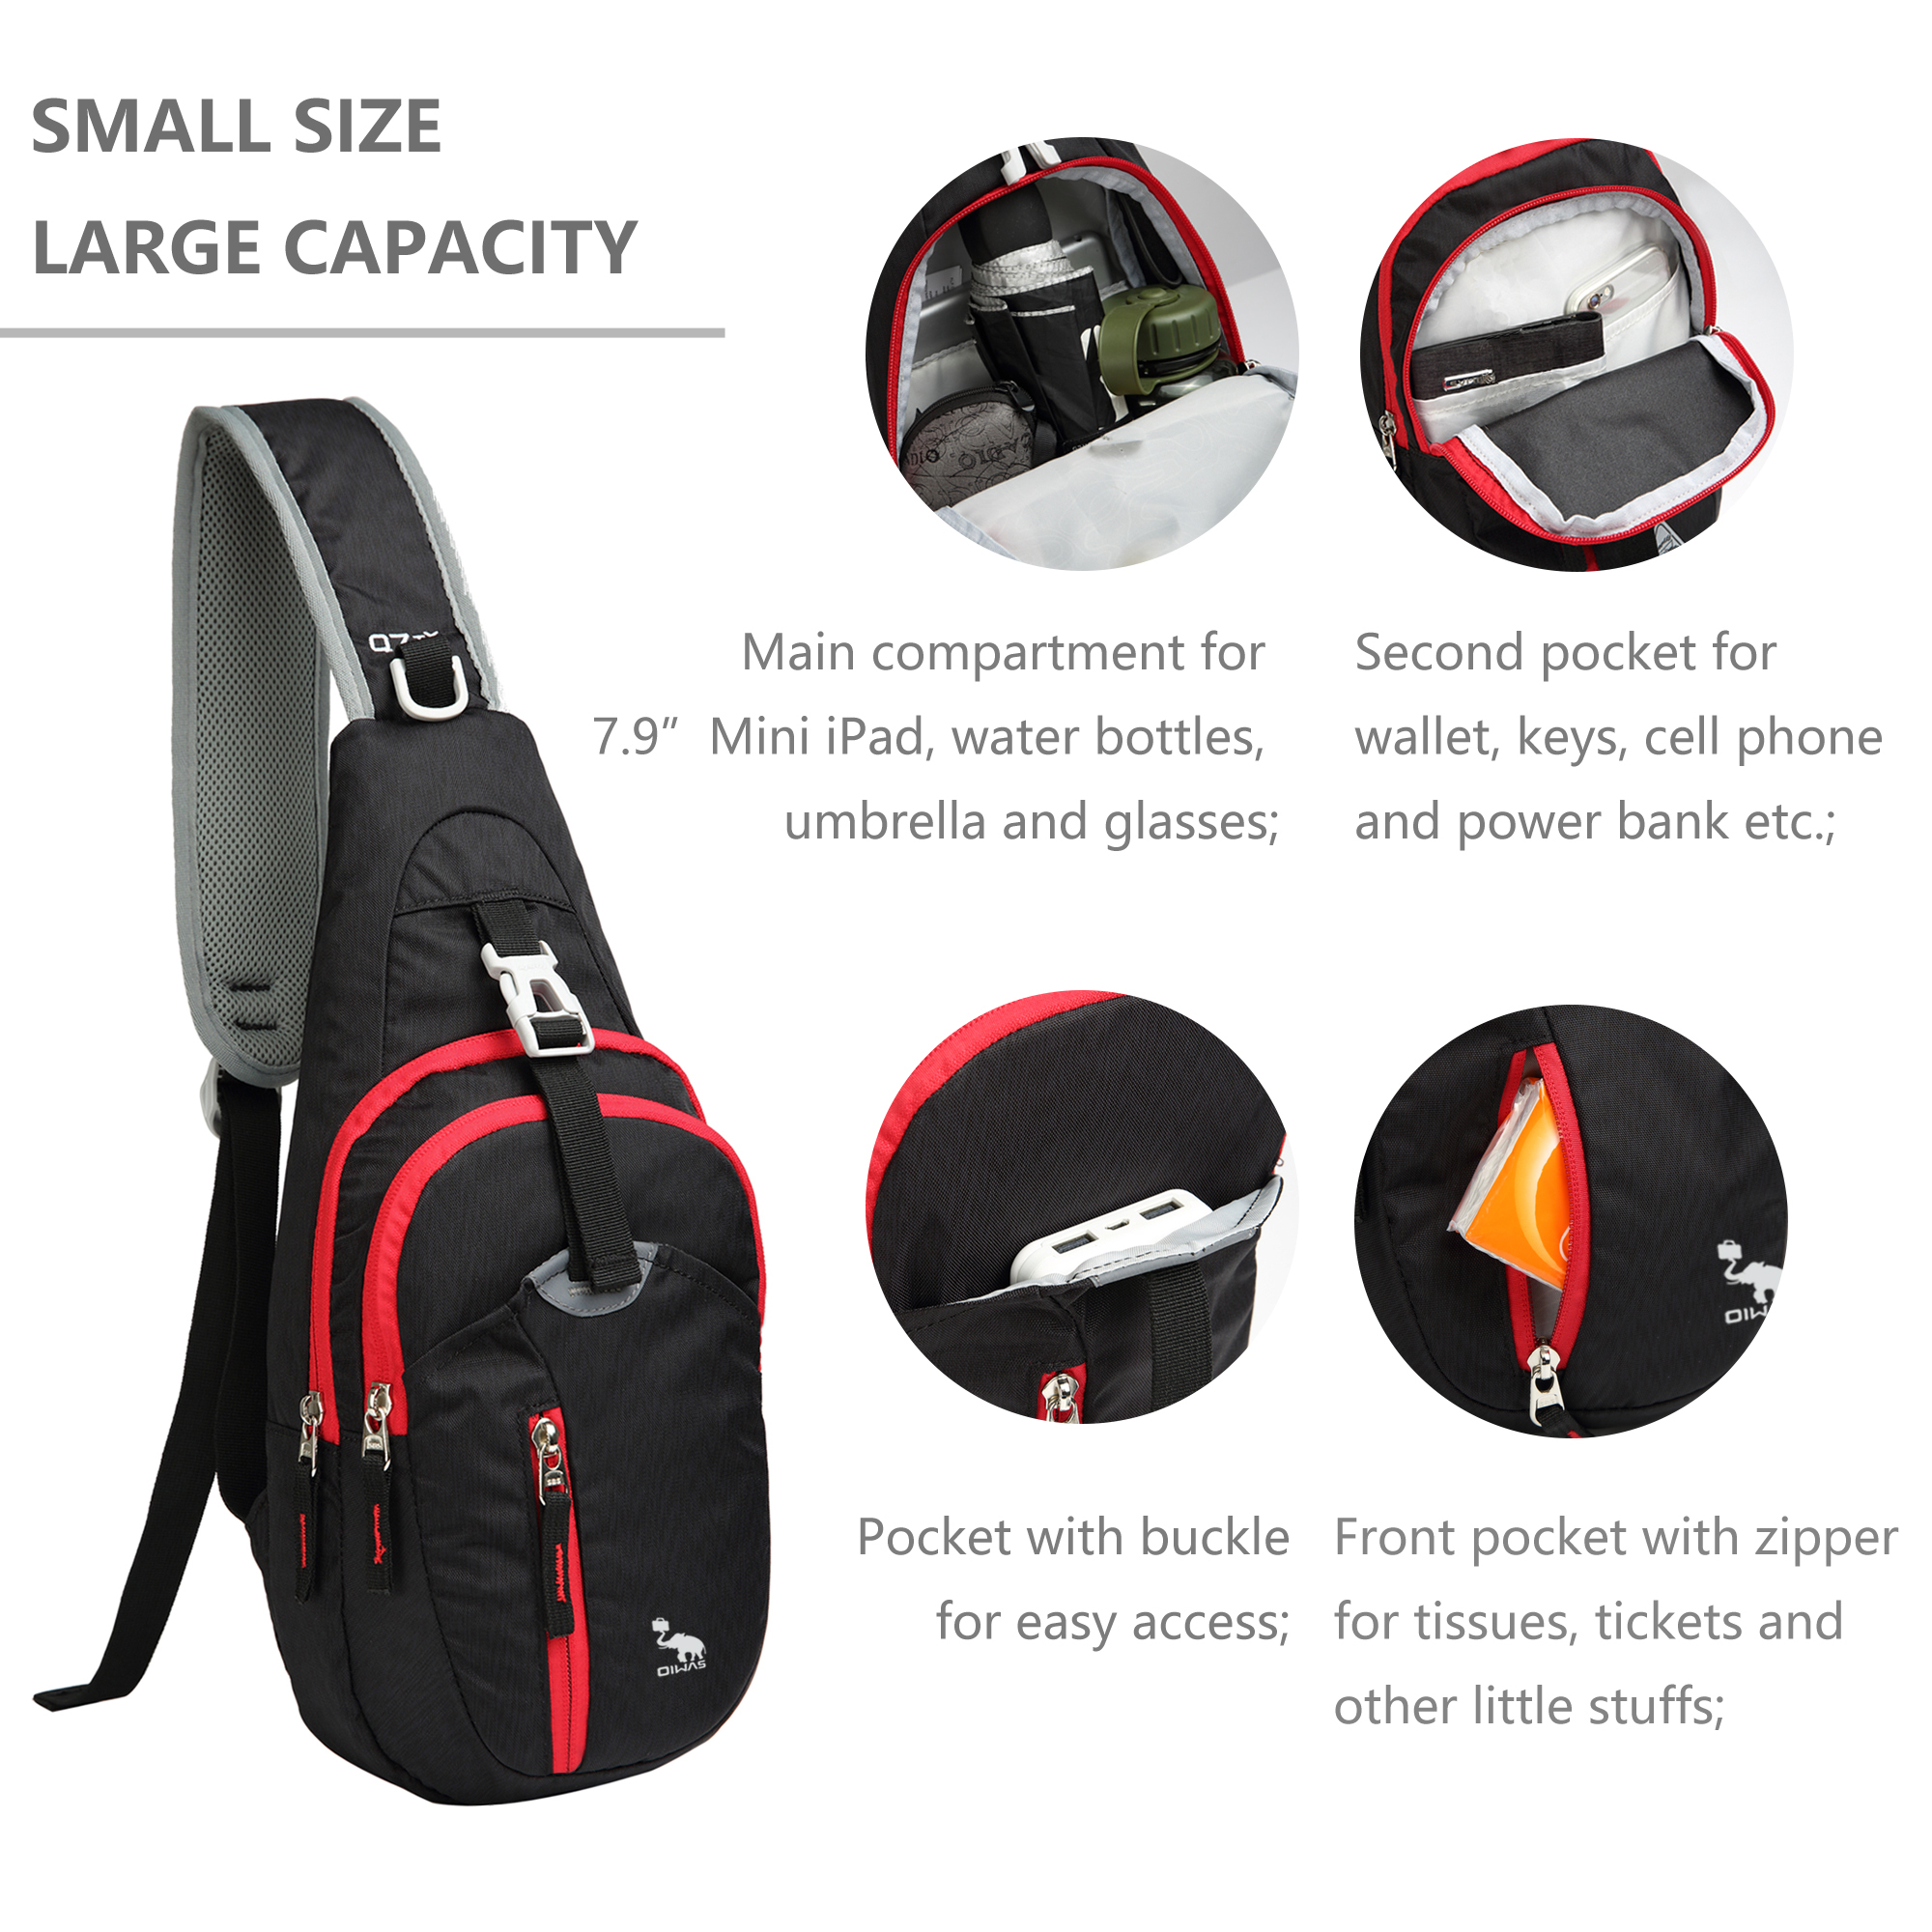 OIWAS Travel Sling Backpack, Black and Red, Unisex, Adult - Walmart.com